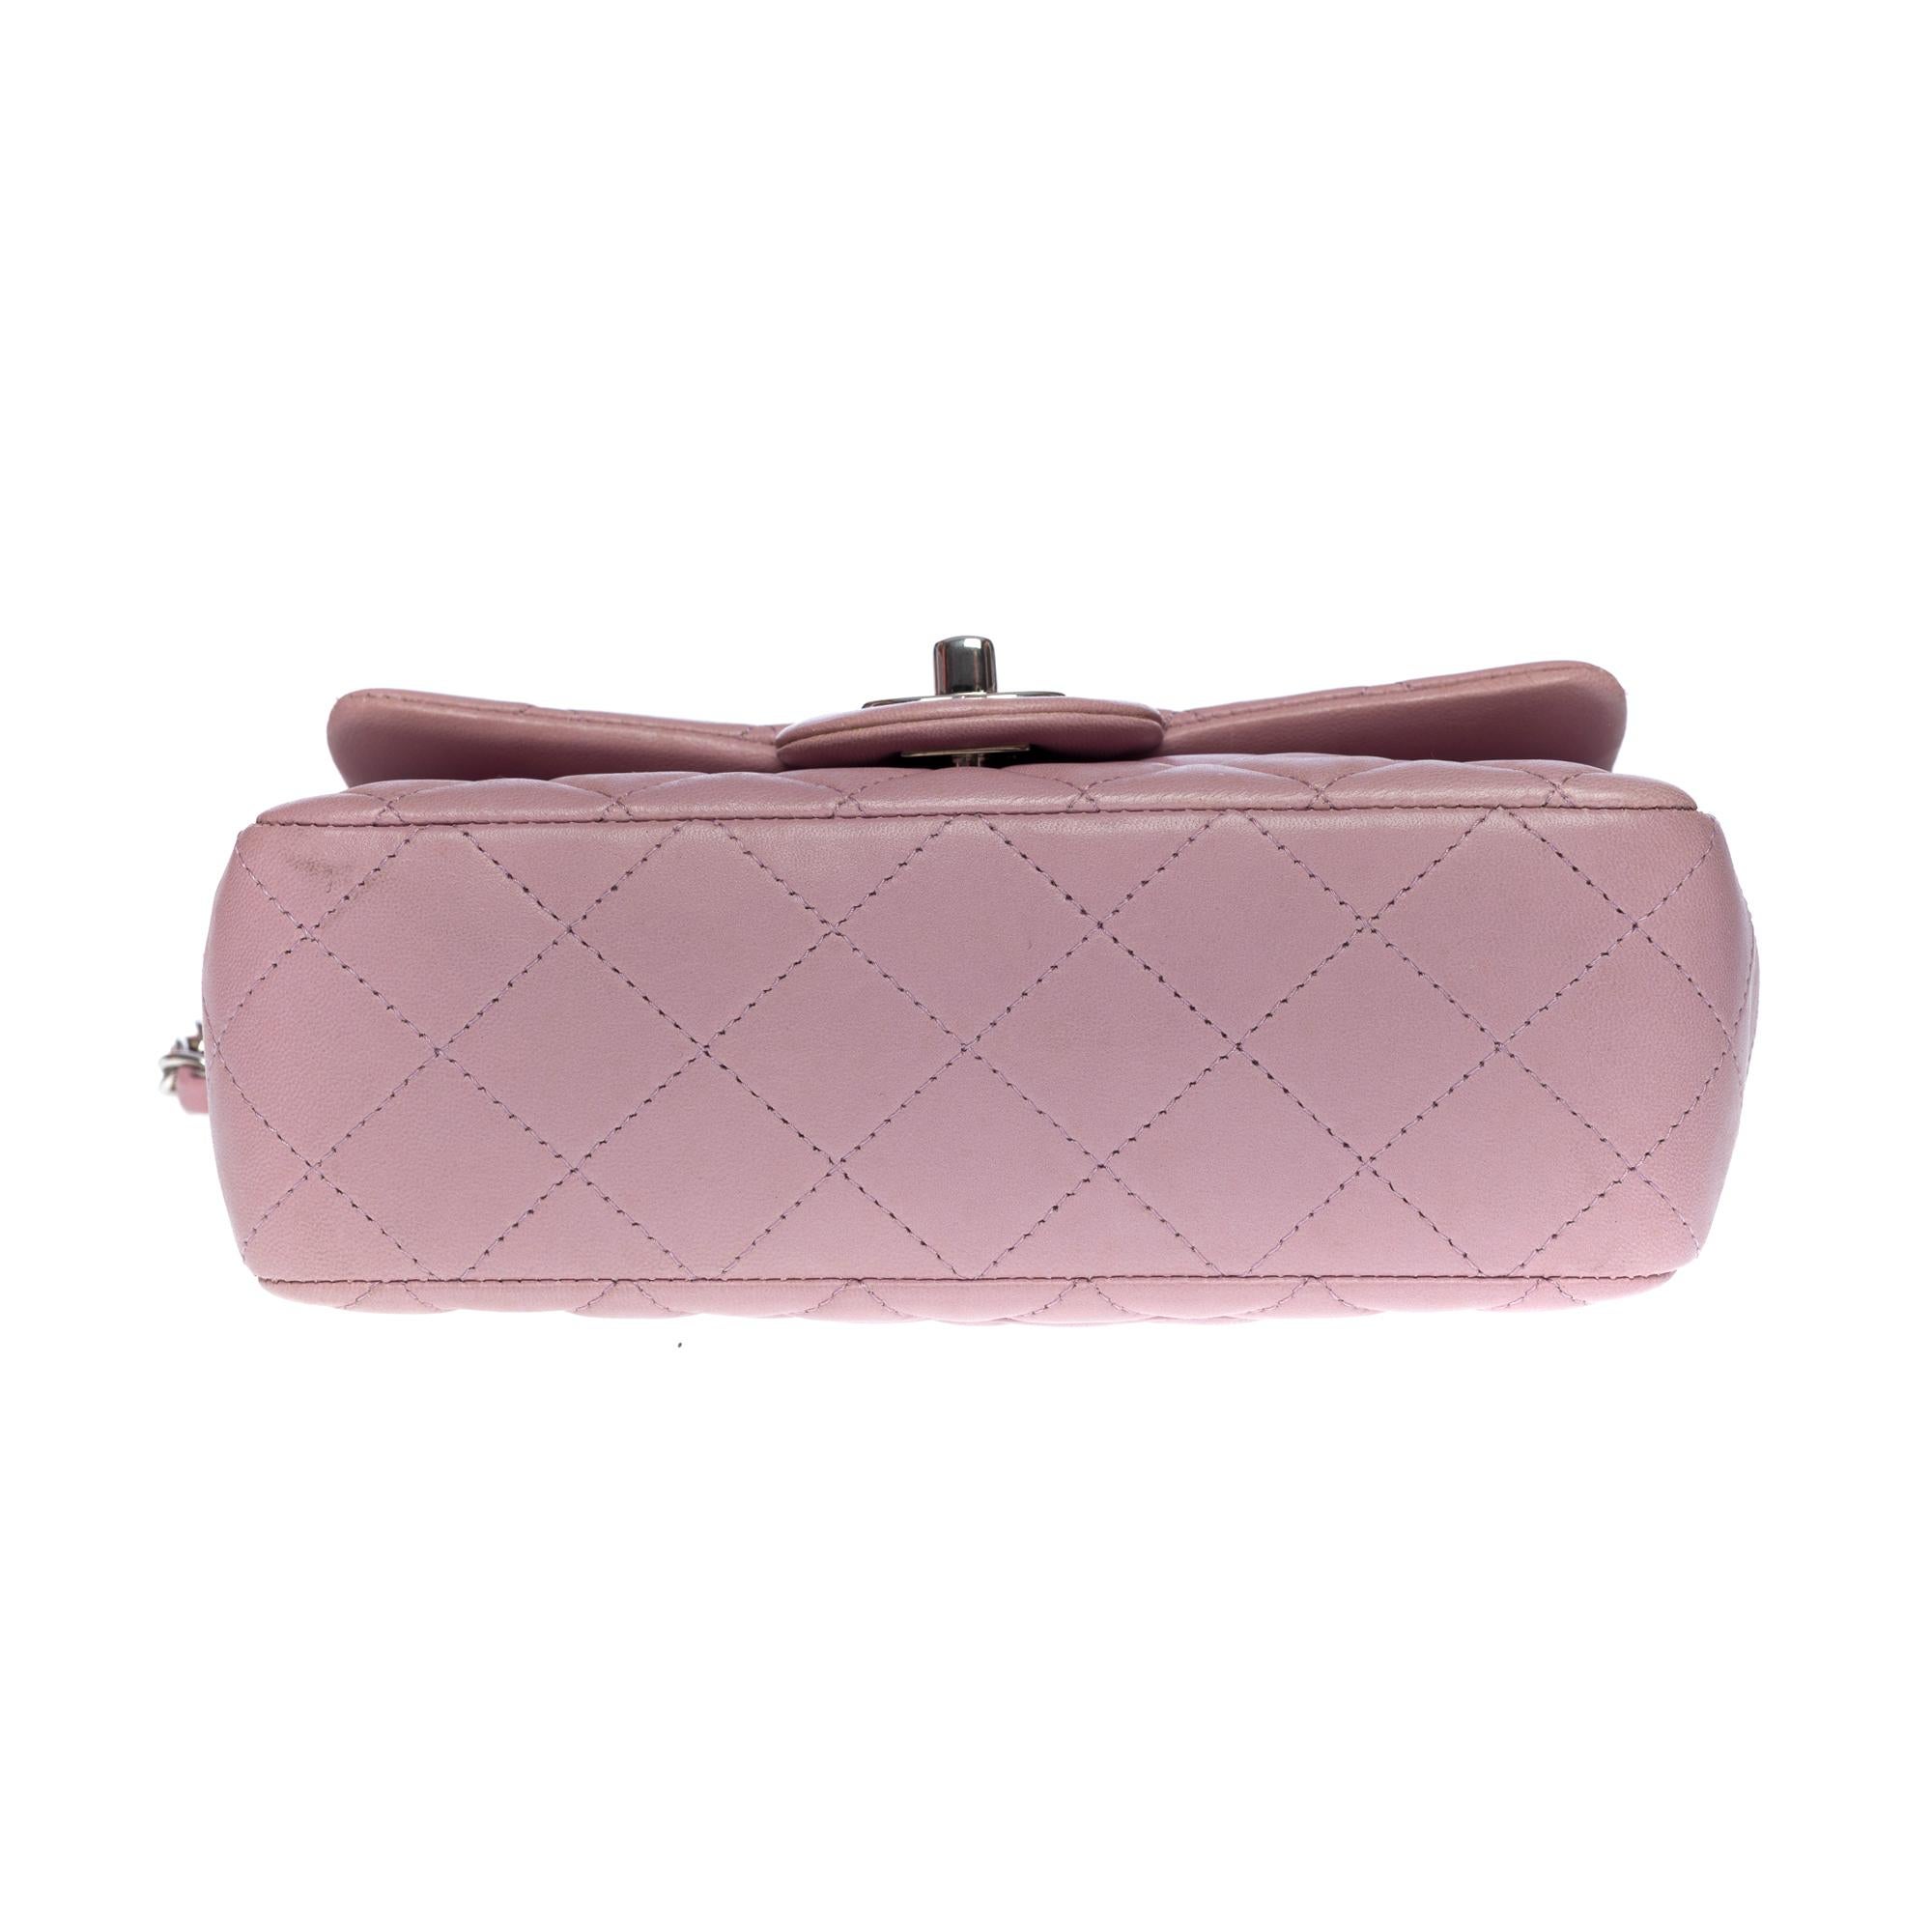 Splendid Chanel Timeless Mini Flap bag in lilac quilted lambskin leather, SHW 6